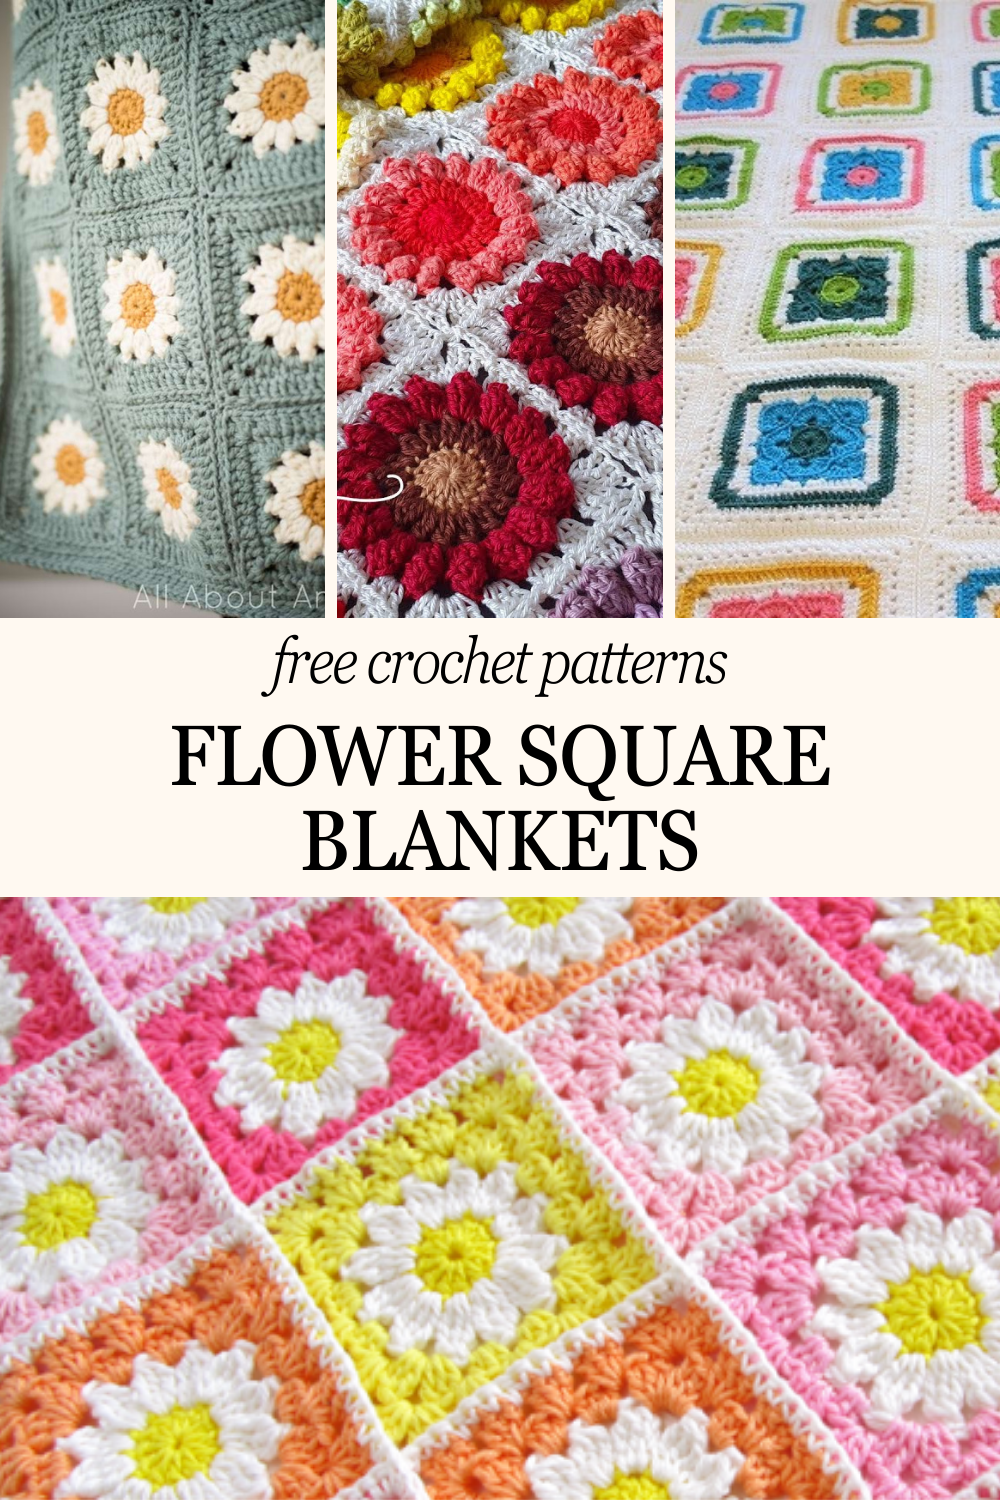 Looking for beautiful crochet projects? Try these free flower-based square blanket patterns! Perfect for cozy nights or as thoughtful gifts, these patterns will add a lovely floral touch to your creations. Happy crocheting! 🌸✨ #CrochetPatterns #CraftingJoy #FloralDesigns